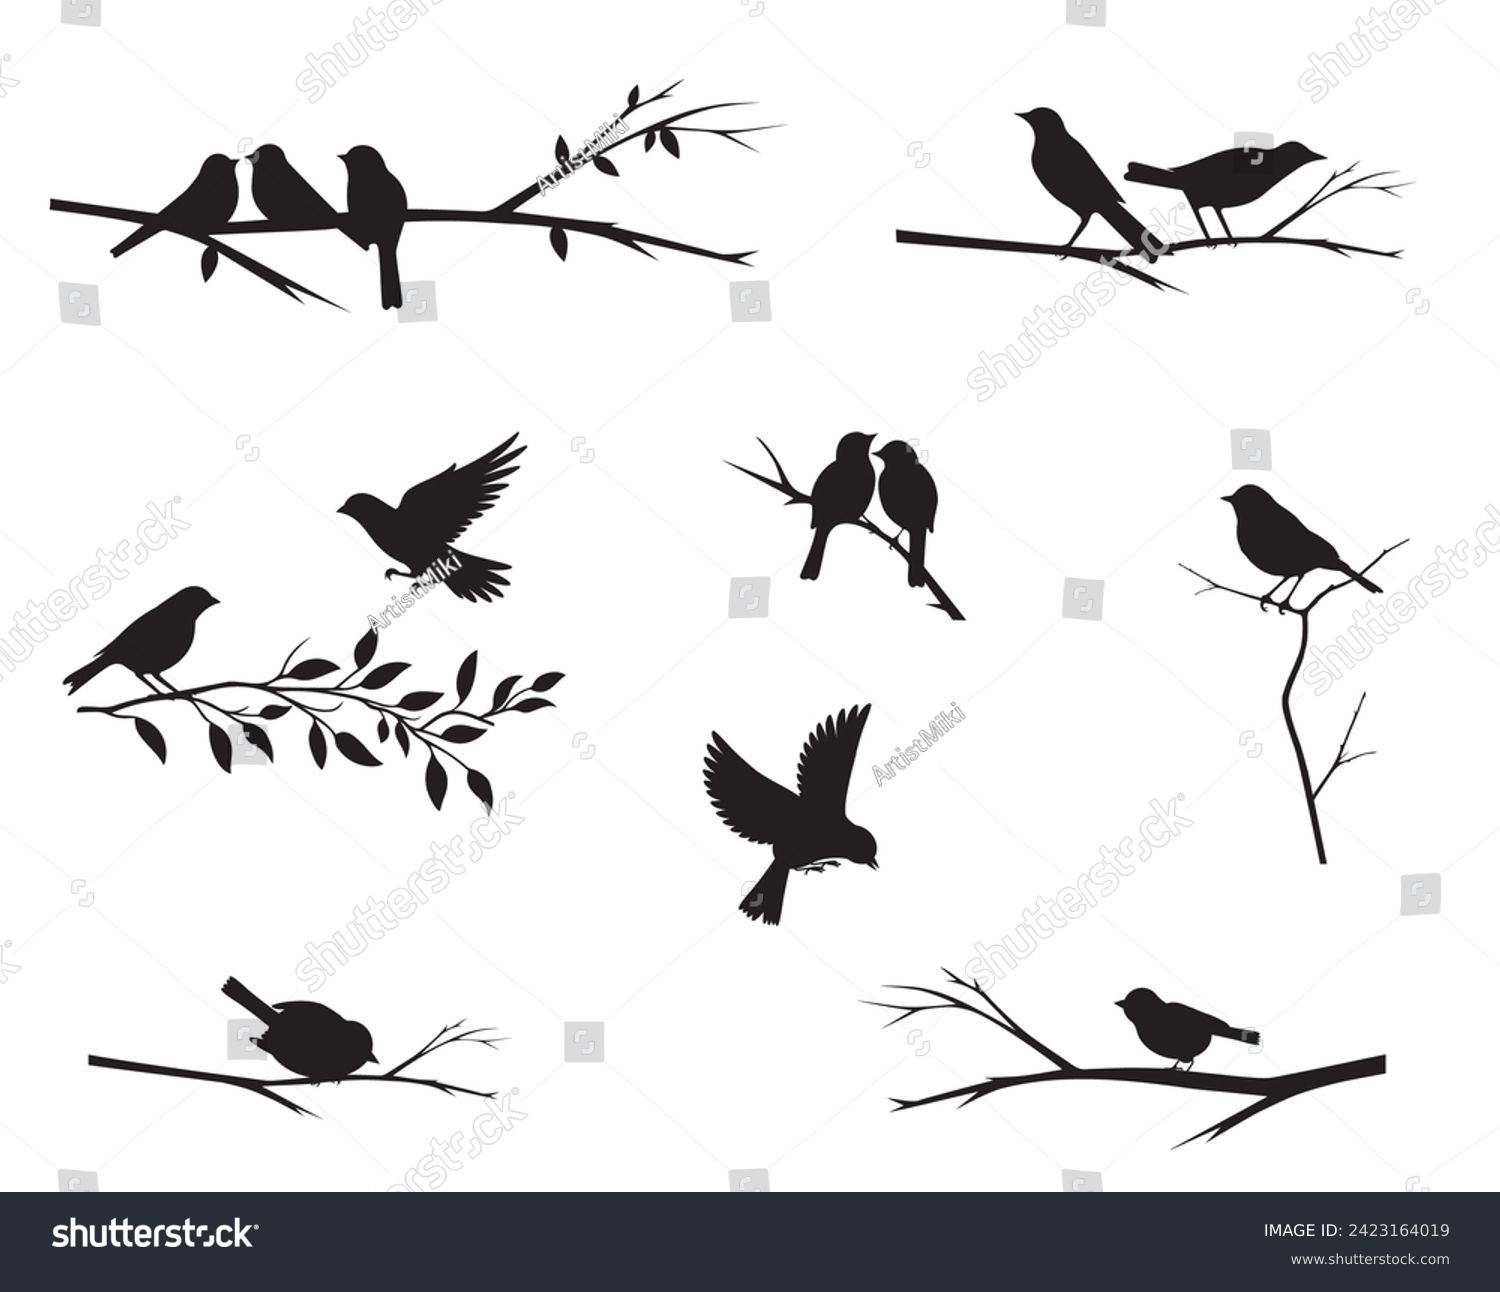 SVG of Birds on branch silhouette set, vector illustration isolated on white background. Wall decals, wall artwork, birds on tree design, birds silhouette. Art design, wall design  svg